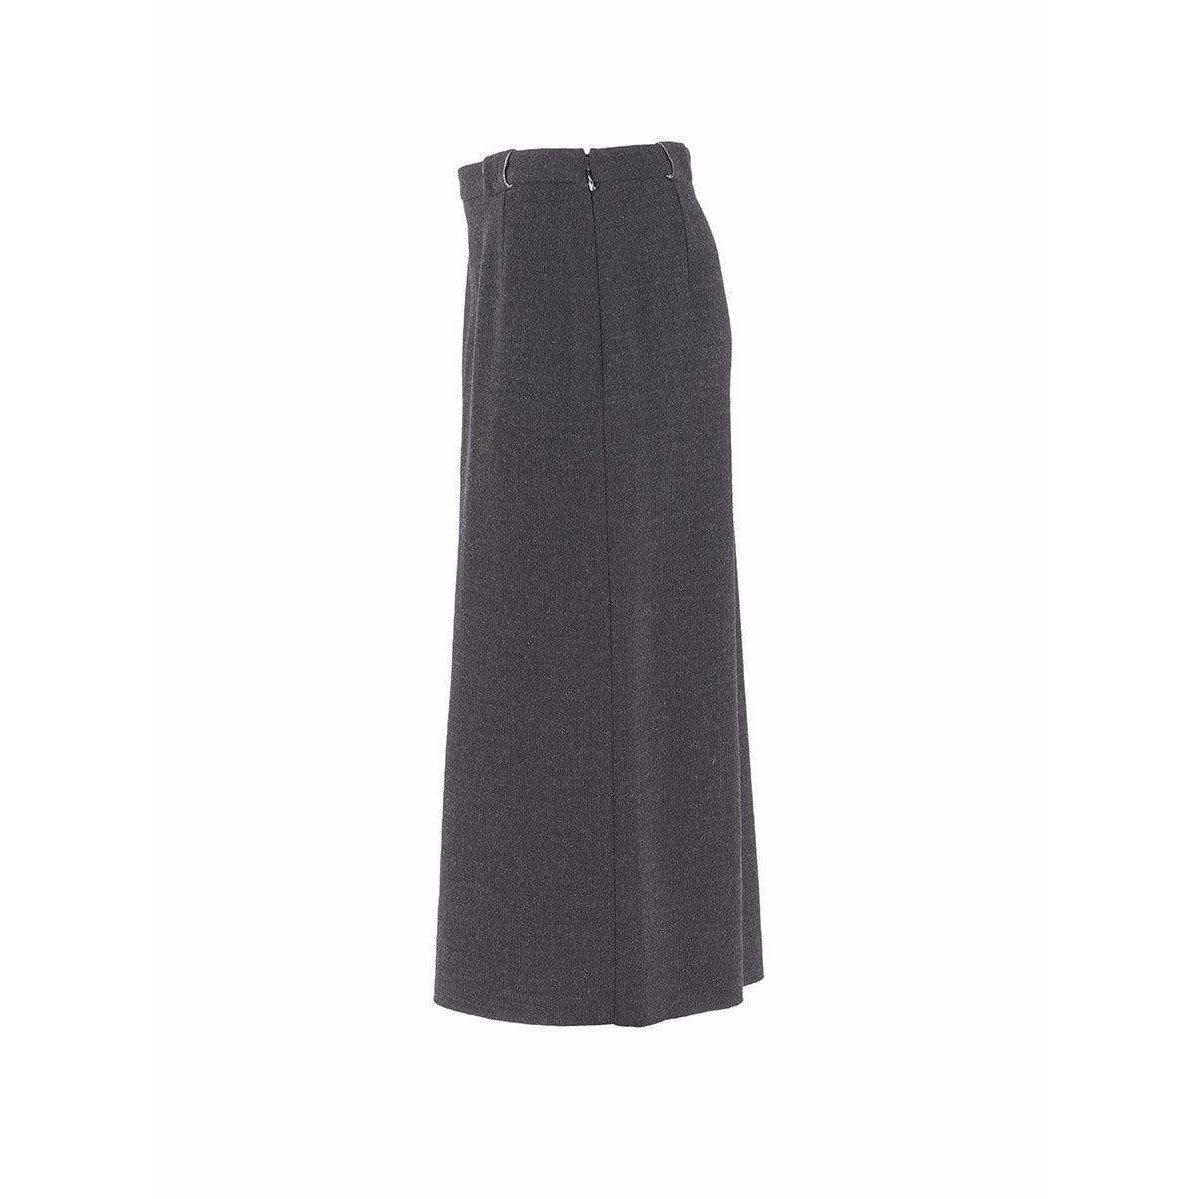 This midi skirt means business in grey wool. This classic skirt from Maison Martin Margiela Iconic Collection comes with sturdy belt loops and is streamlined with a hidden side zip. 
